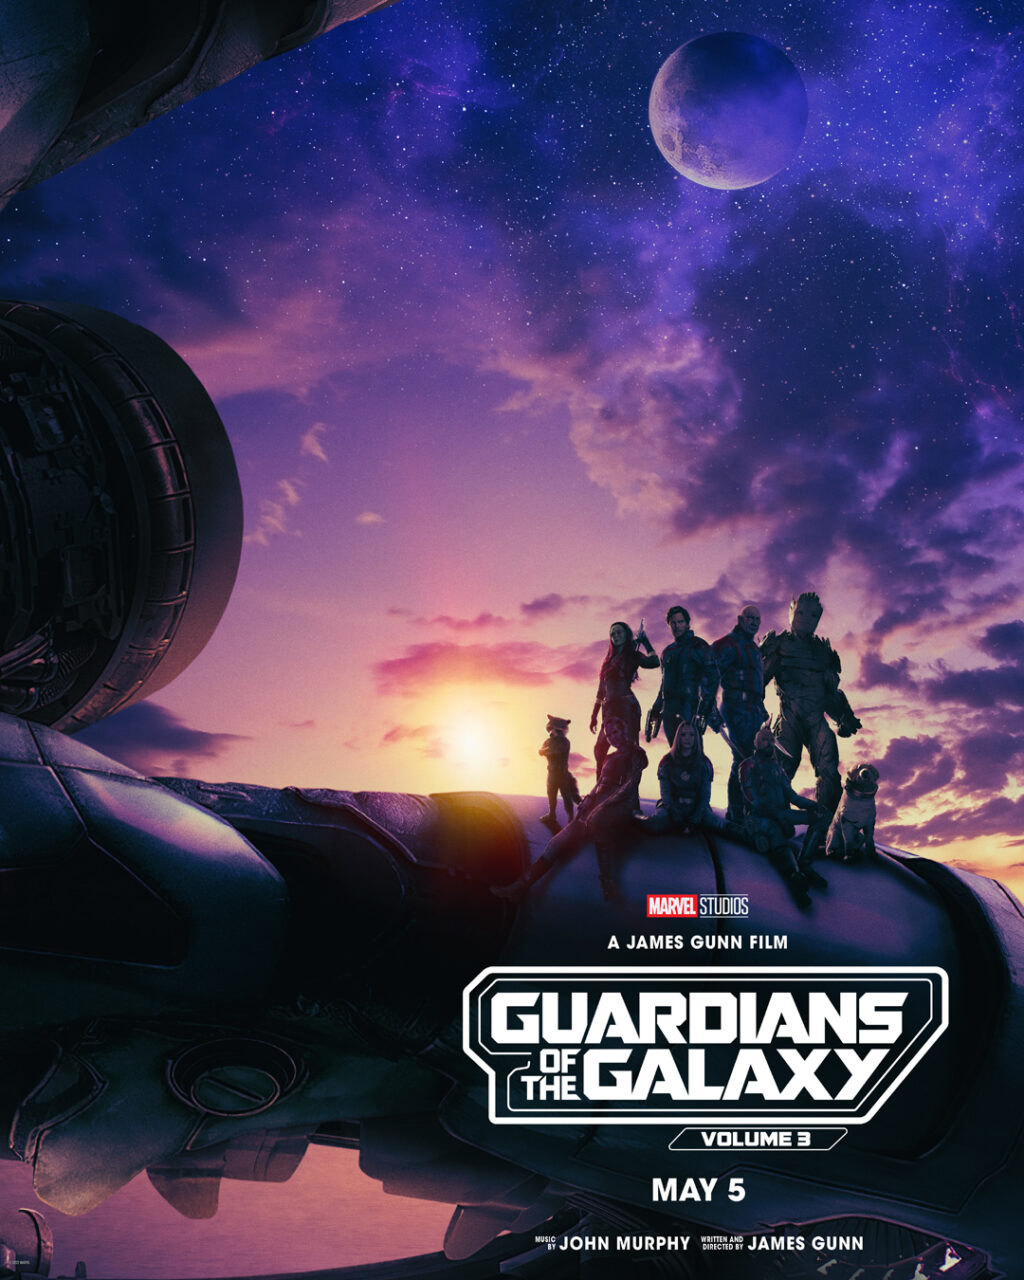 Guardians Of The Galaxy Volume 3 poster (Marvel Studios)